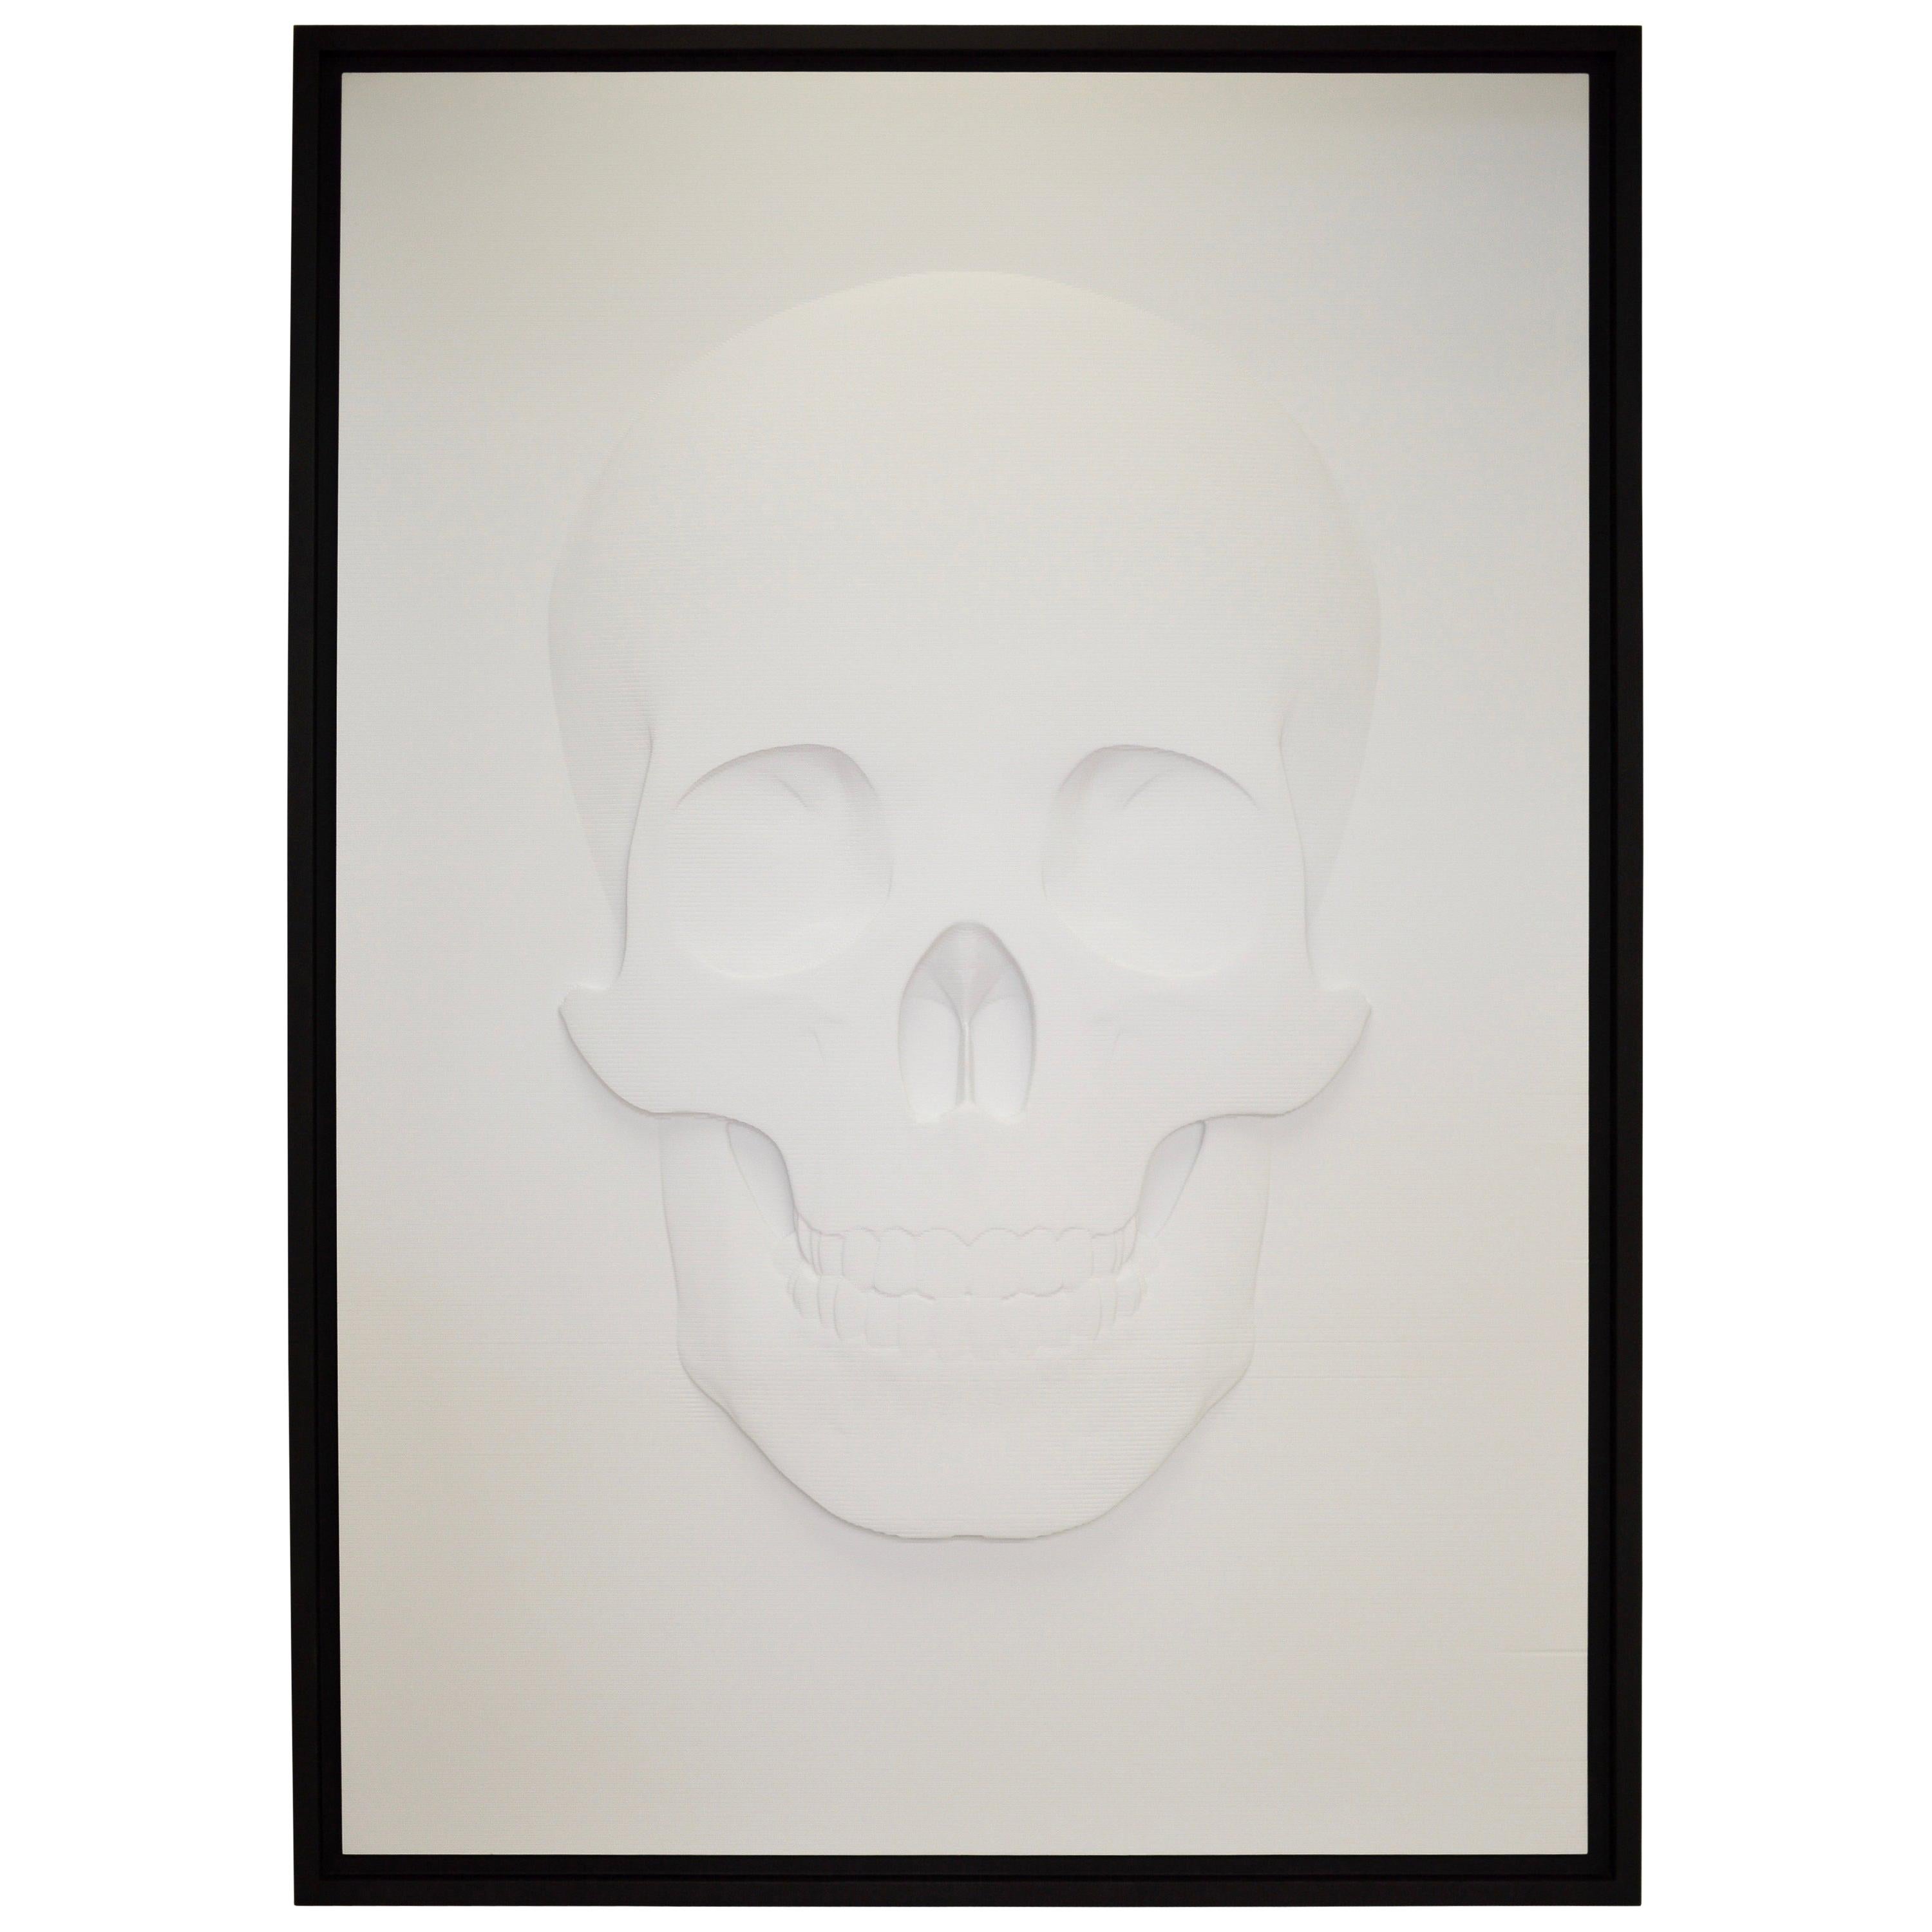 3D Skull Portrait "How They See Us" by Samuel Greg, 2018 For Sale